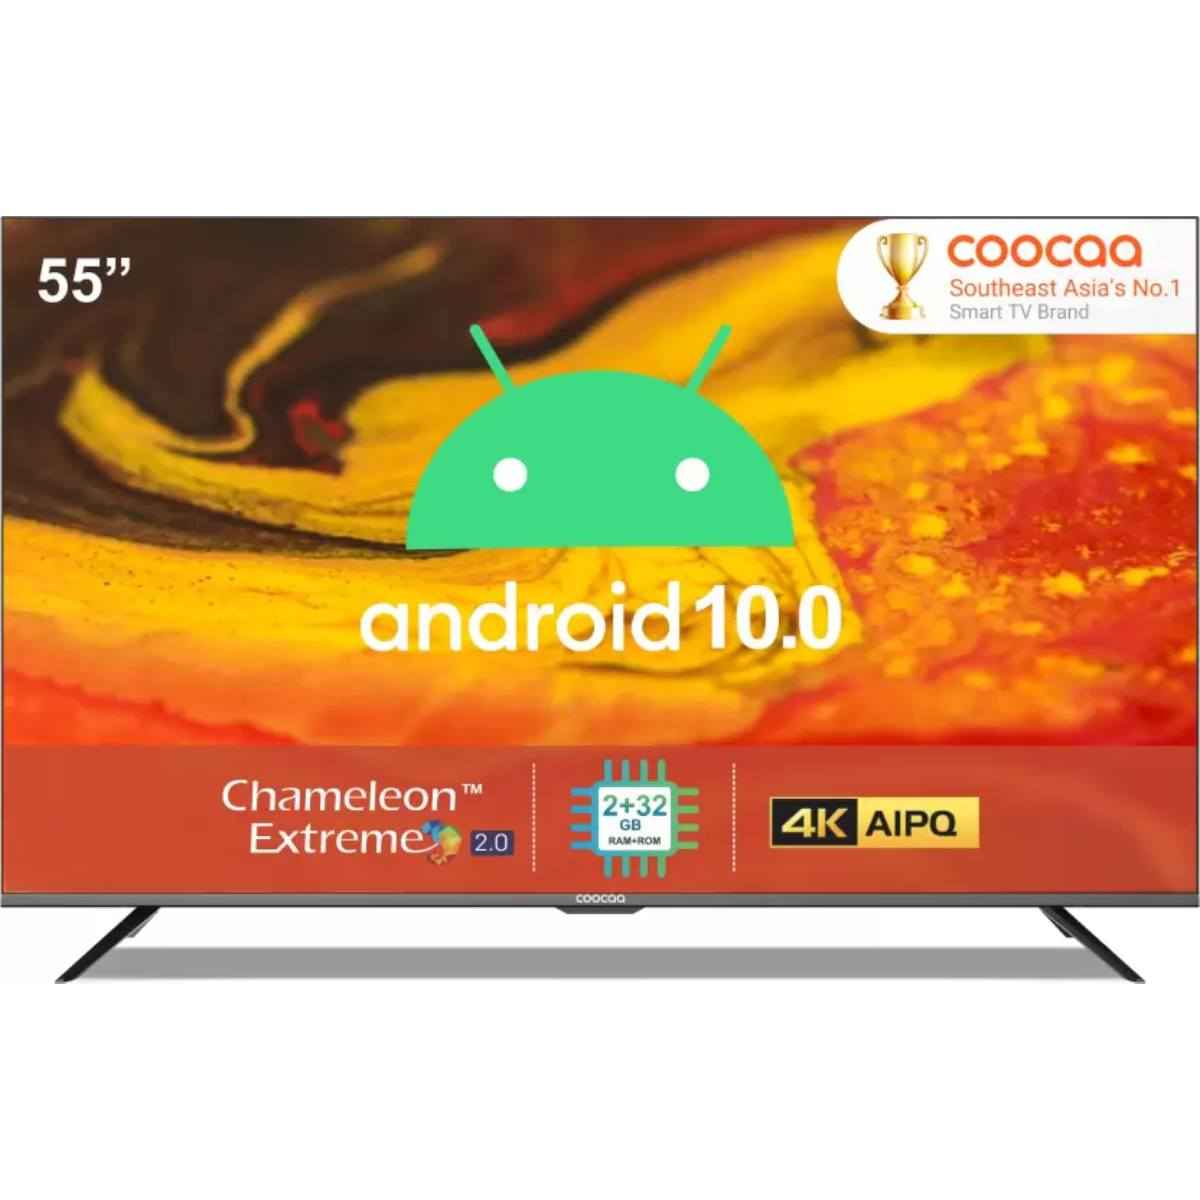 Coocaa 55 inch 4K LED Smart TV with 10.0 Q (55S6G Pro)